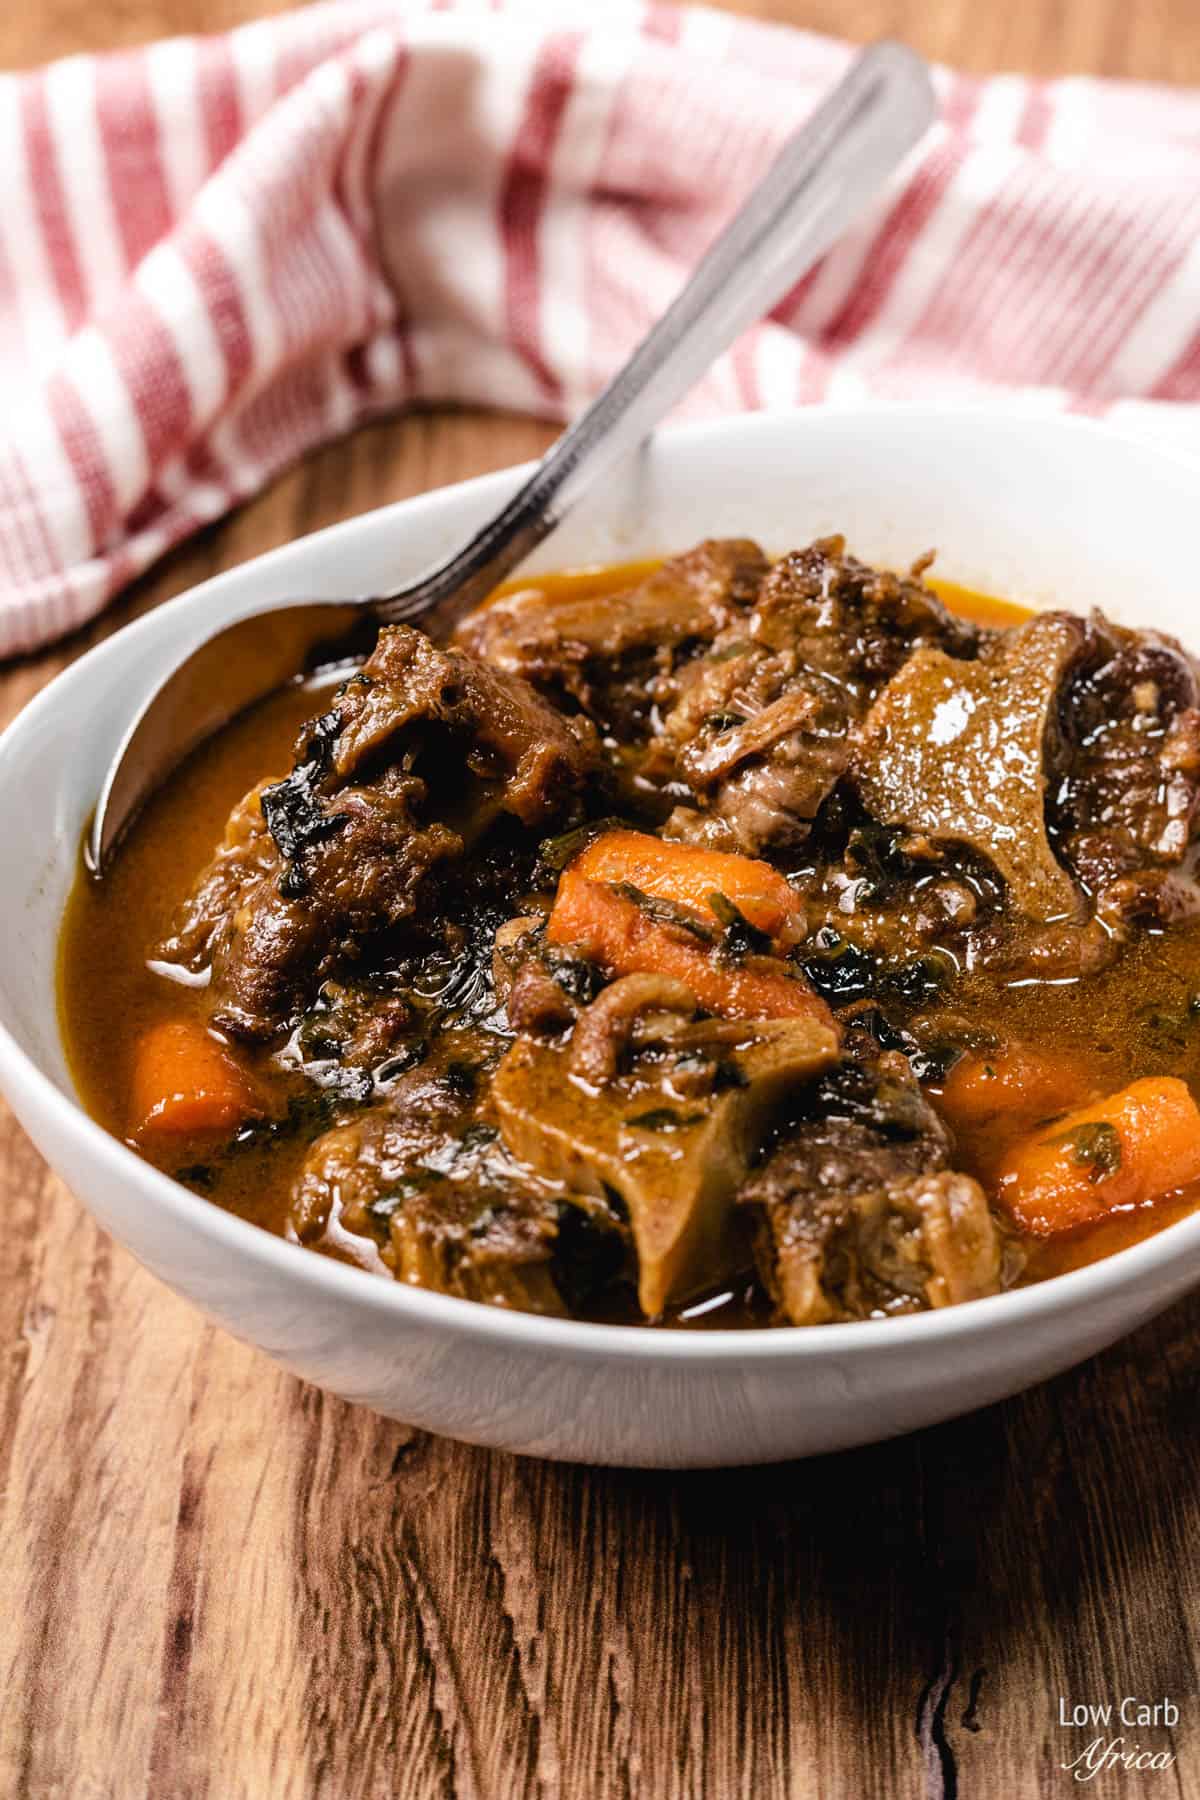 Ready-to-eat Jamaican oxtail soup